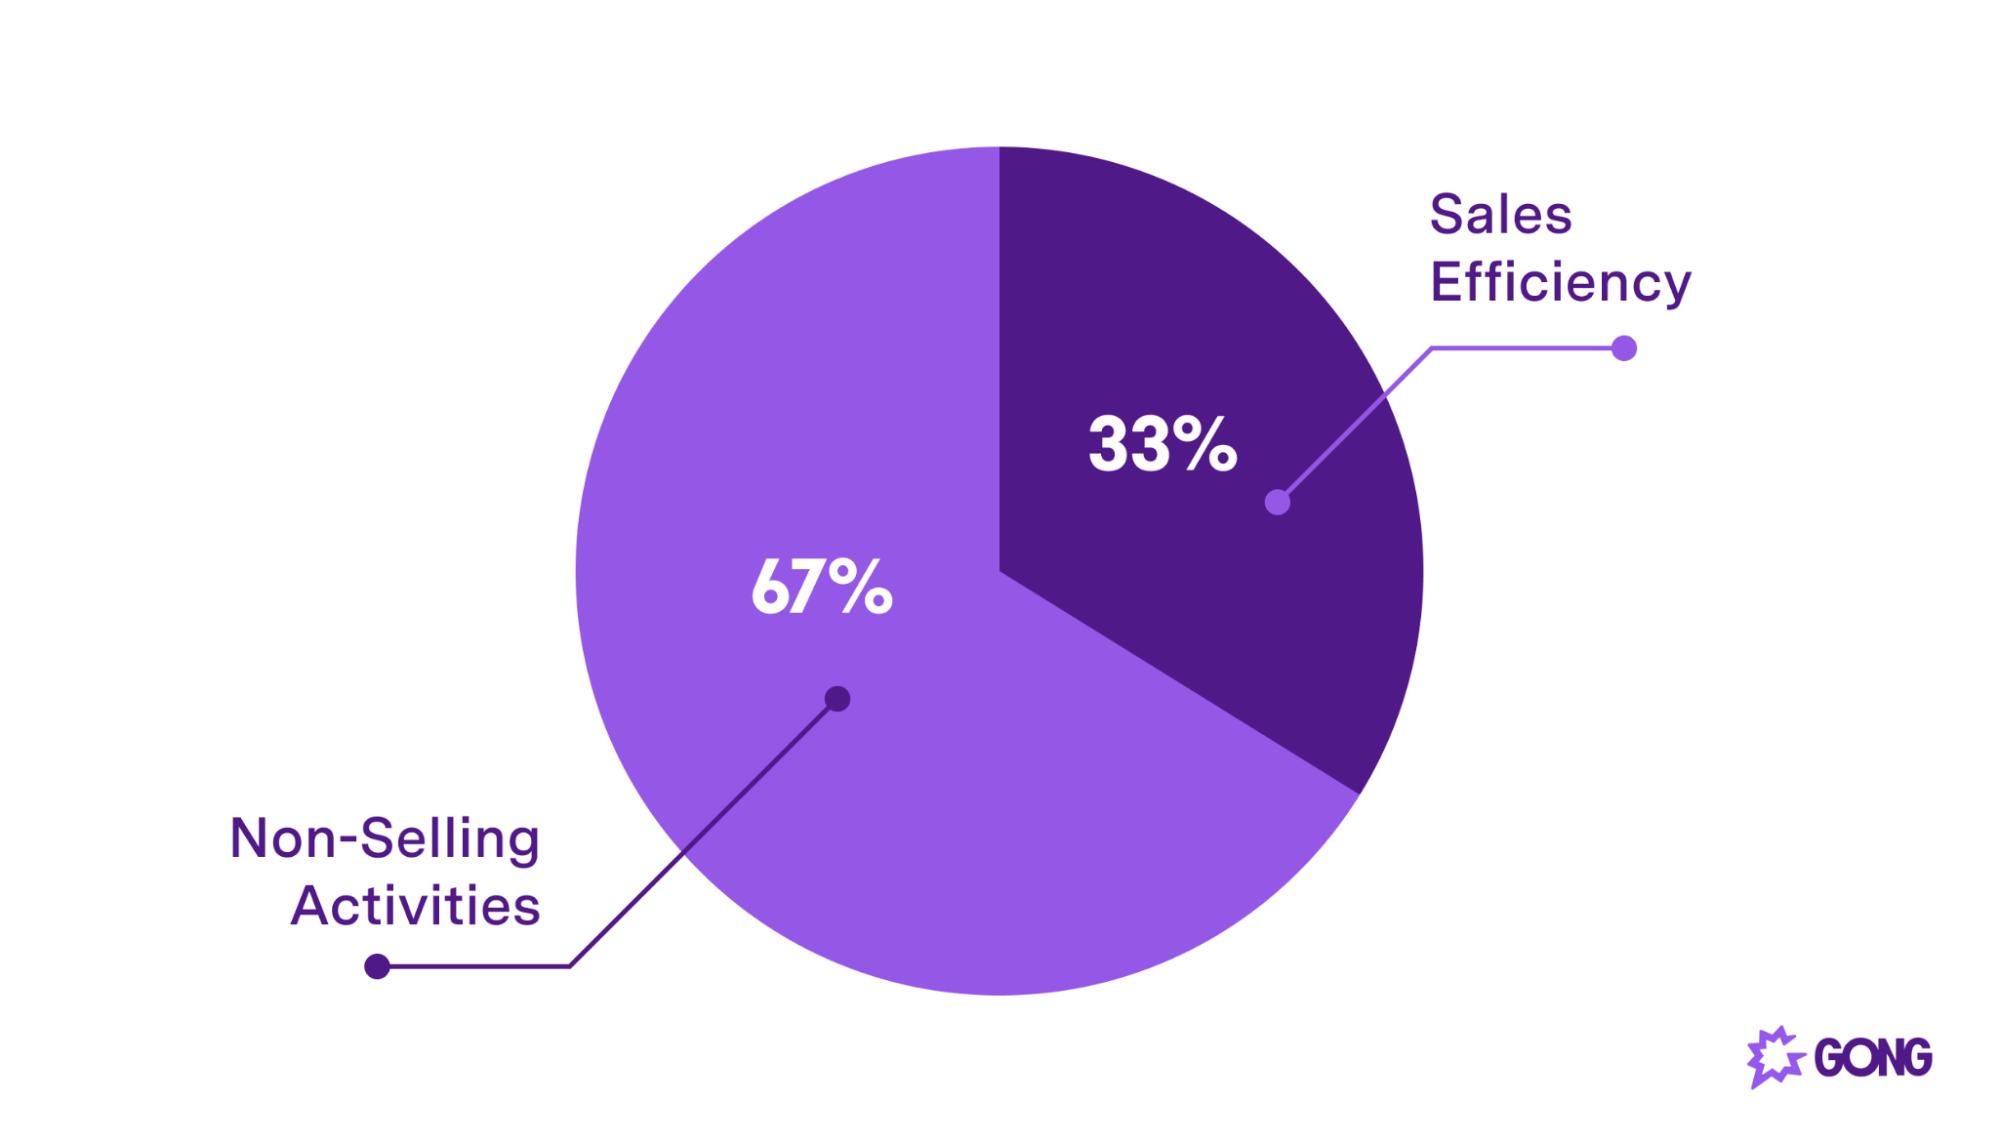 Reps spend 67% of their time on non-selling activities